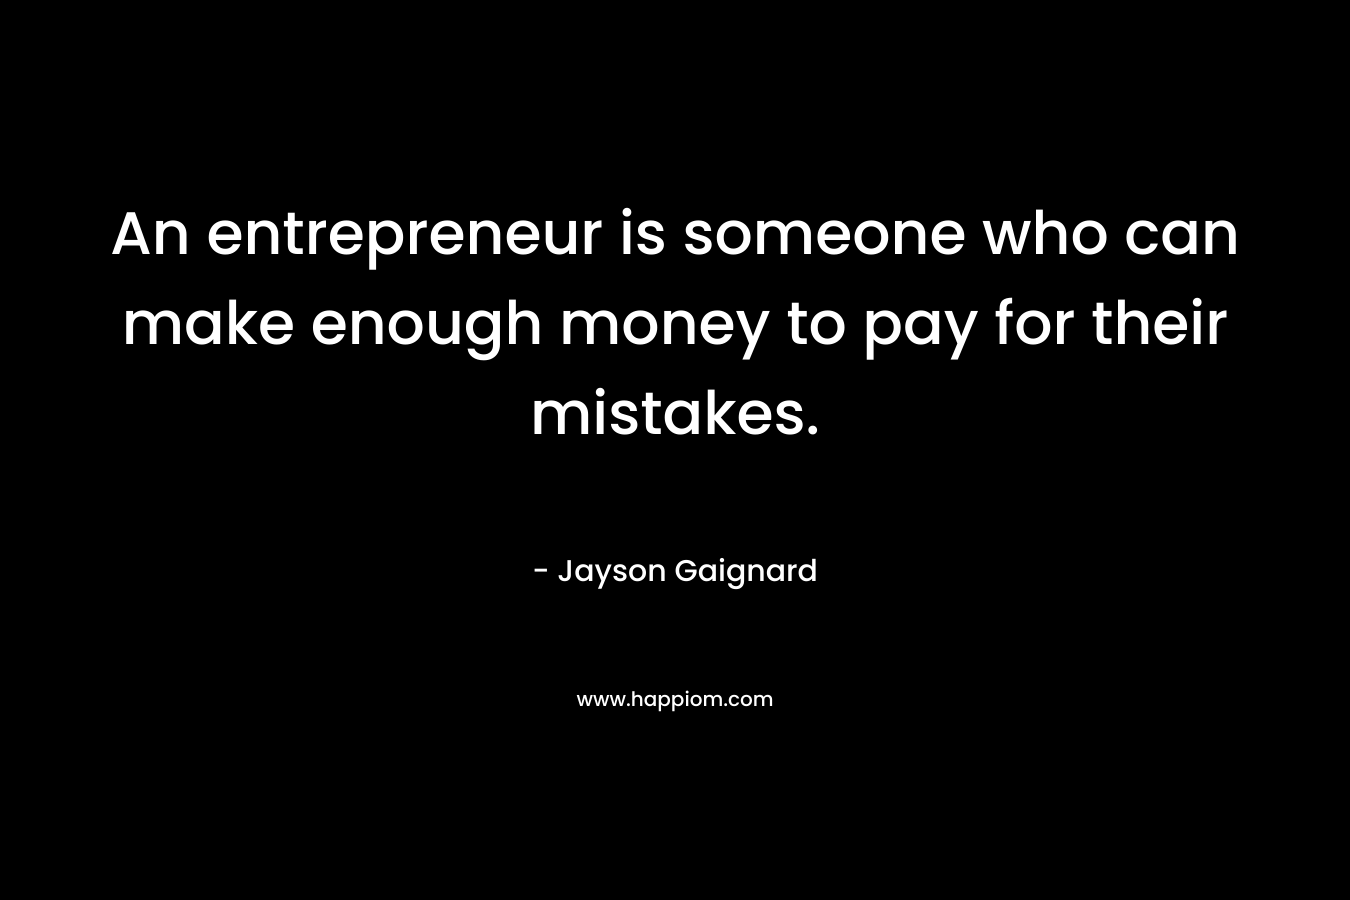 An entrepreneur is someone who can make enough money to pay for their mistakes.